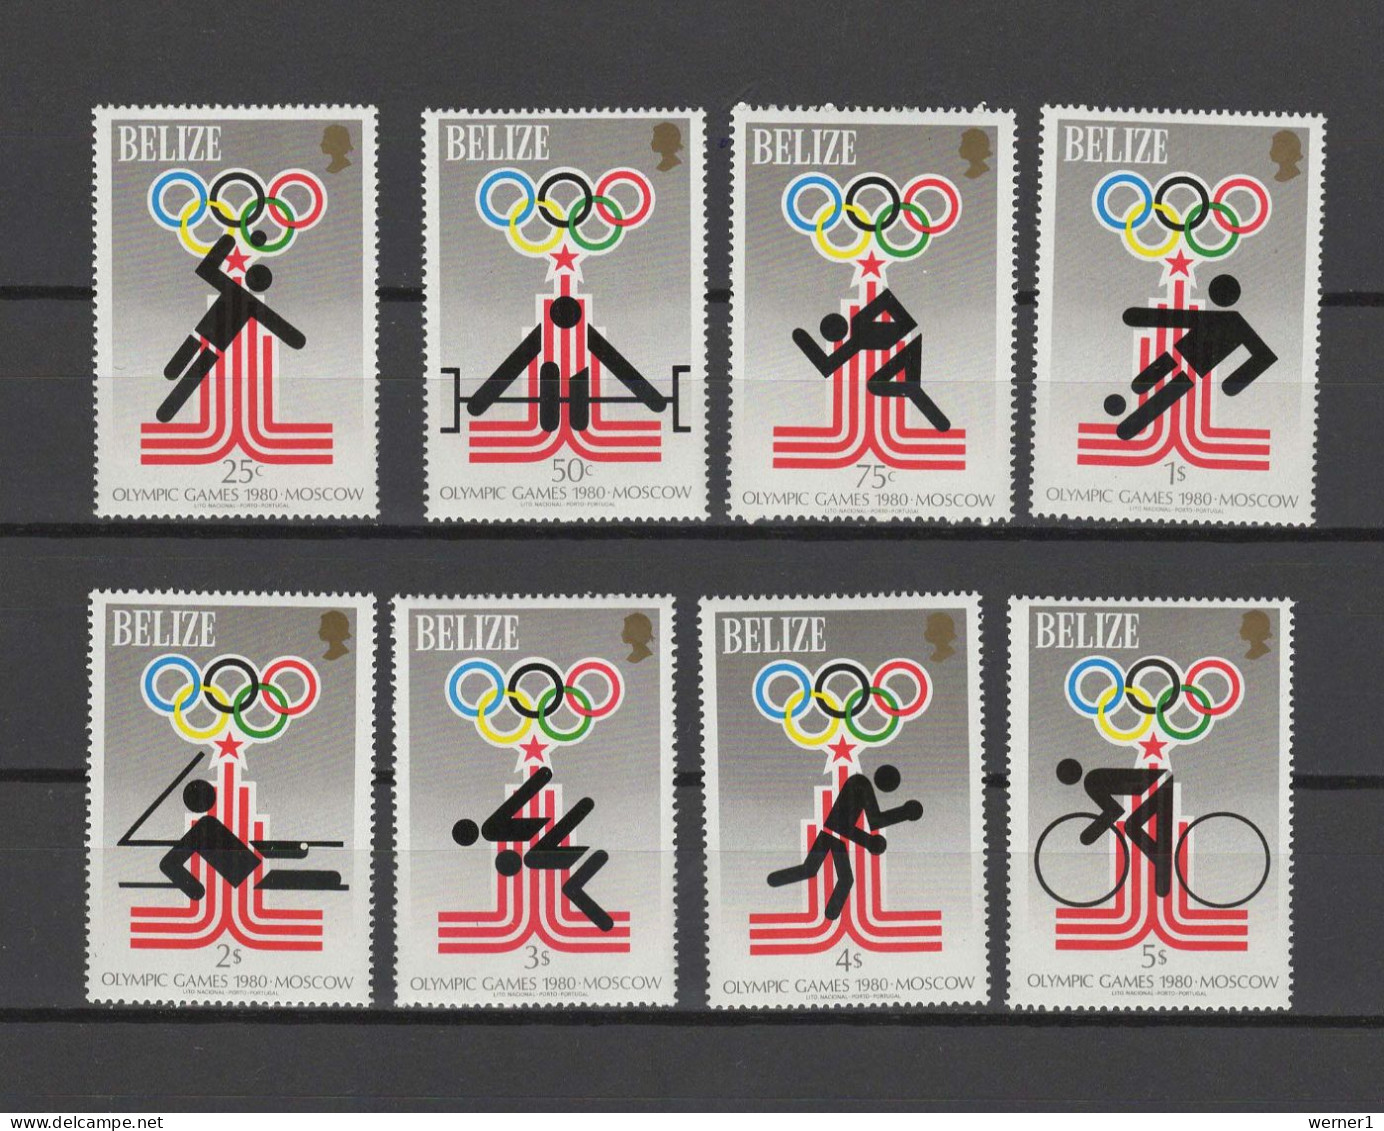 Belize 1979 Olympic Games Moscow, Handball, Football Soccer, Cycling, Weightlifting Etc. Set Of 8 MNH - Ete 1980: Moscou